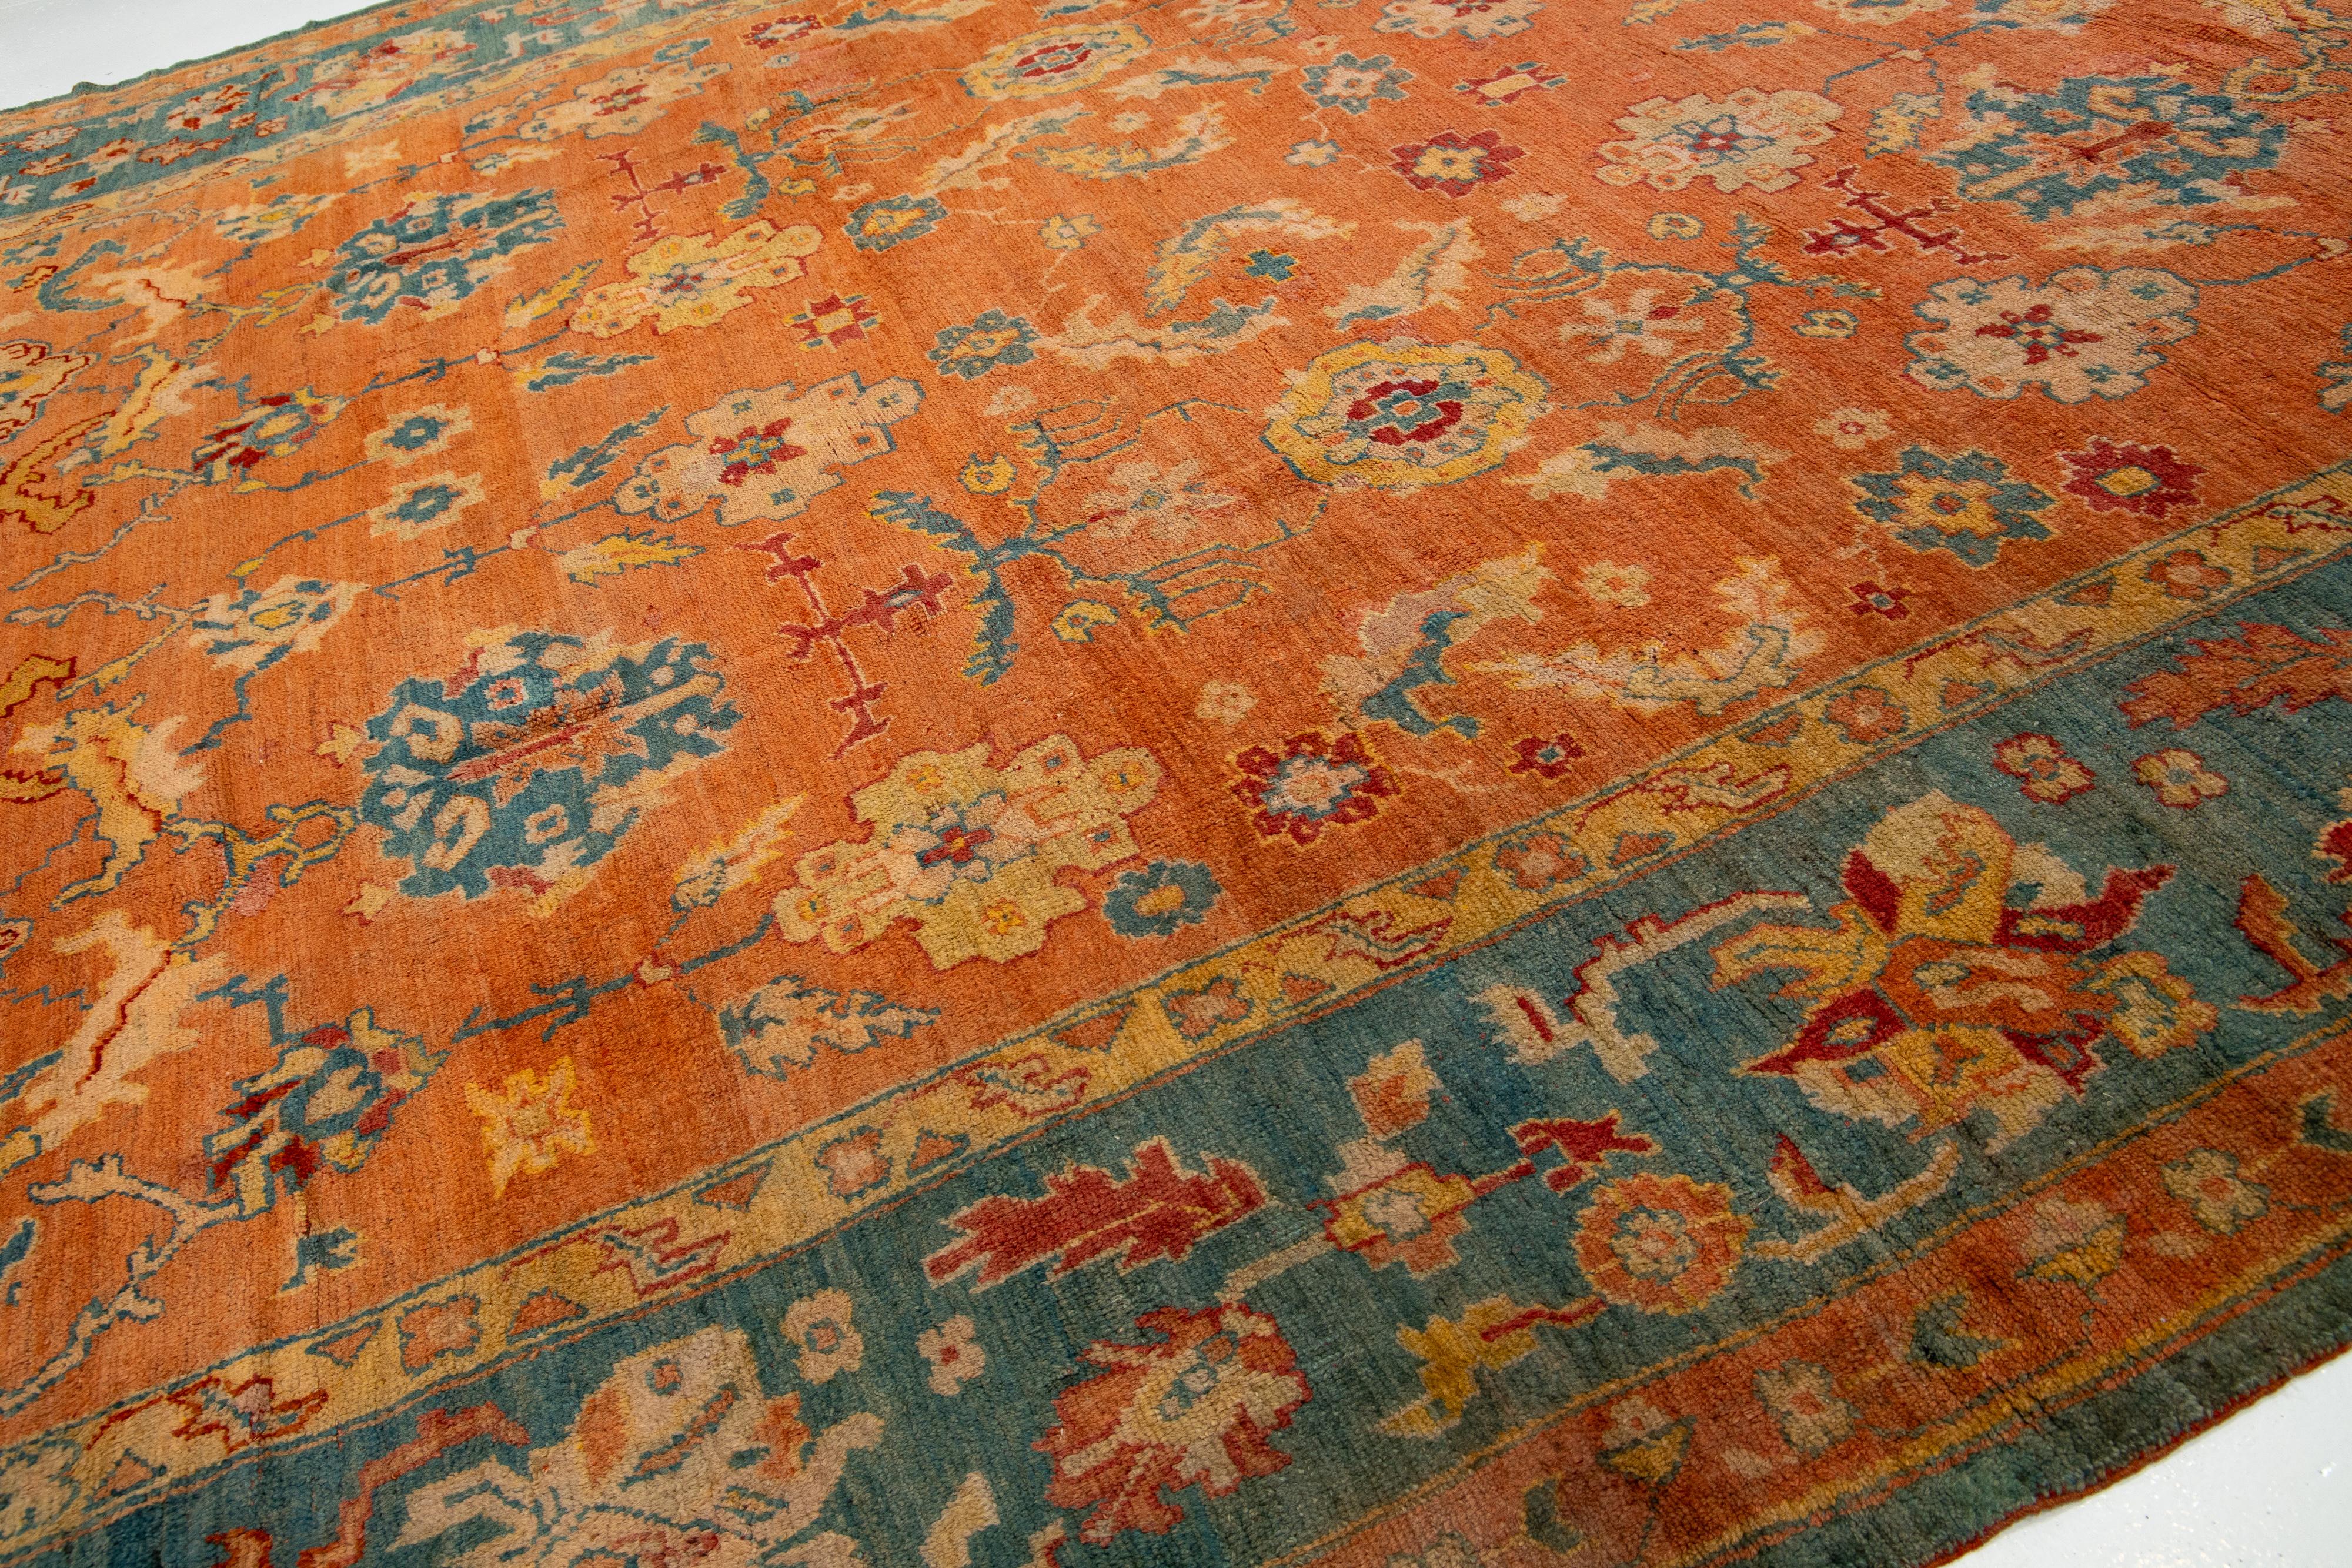 Hand-Knotted Orange and Blue Antique Turkish Oushak Wool Rug Handmade From the 1880s For Sale